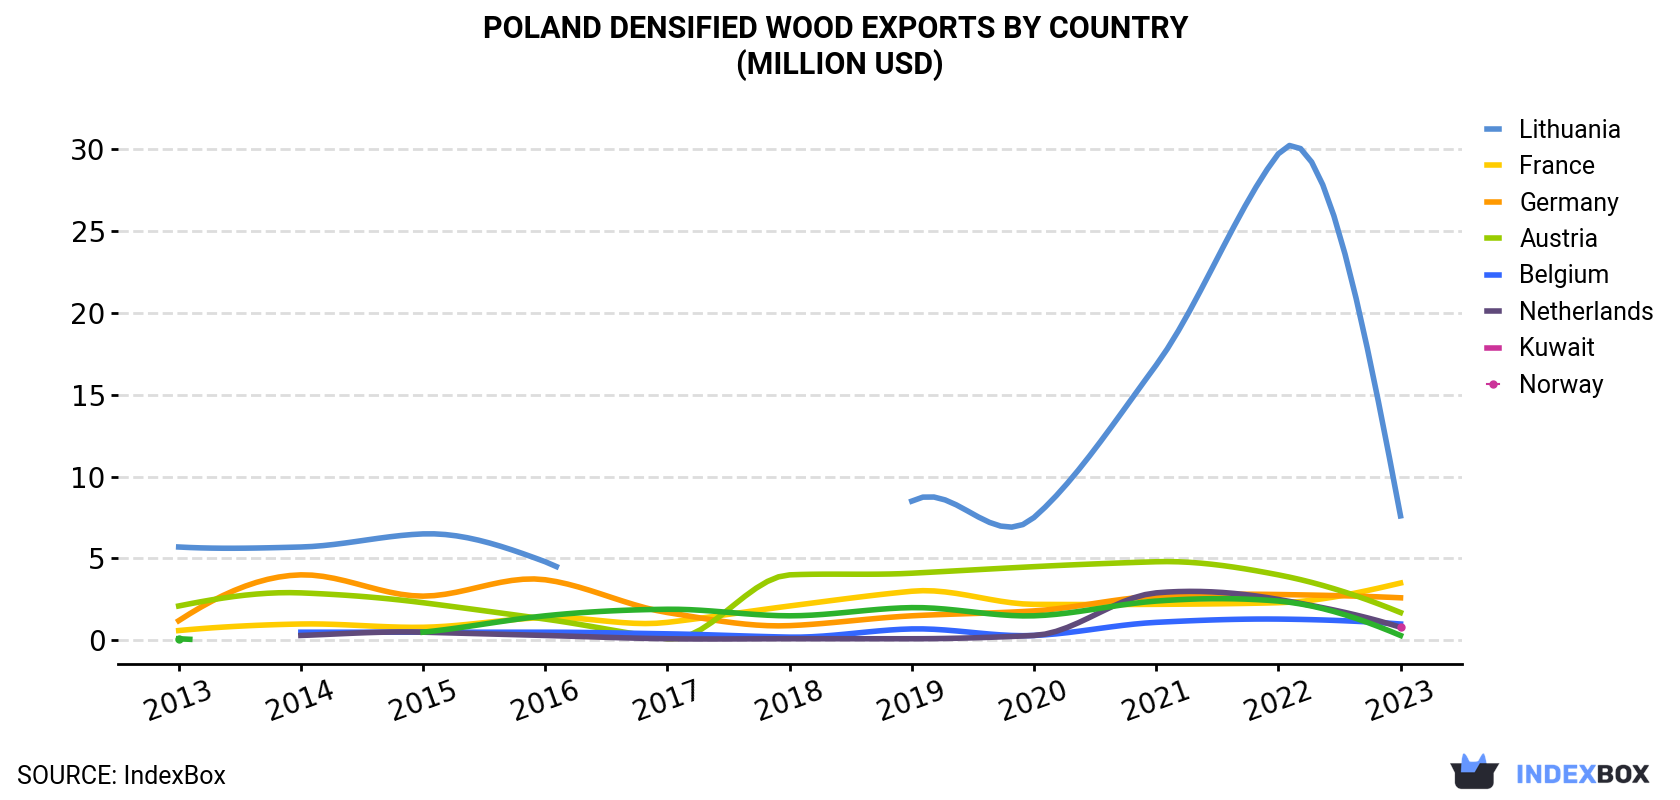 Poland Densified Wood Exports By Country (Million USD)